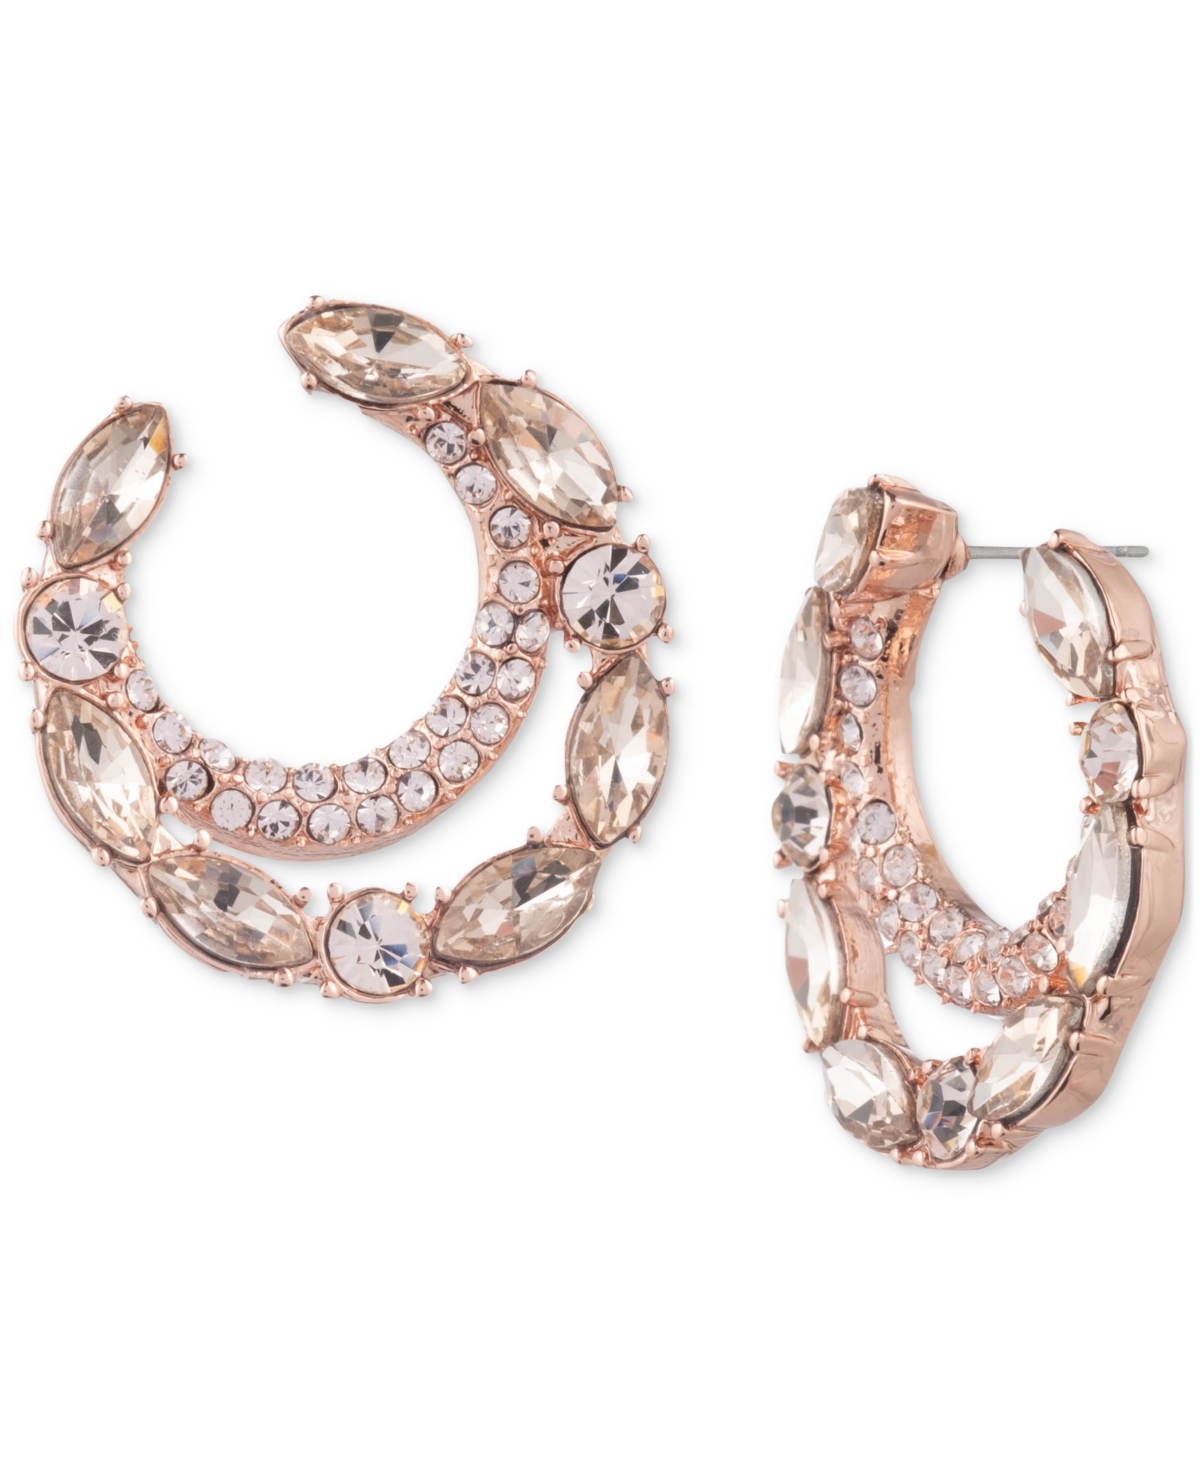 Givenchy Silver-tone Crystal Pave Stone Double Small Hoop Earrings, 0.82" In Rose Gold